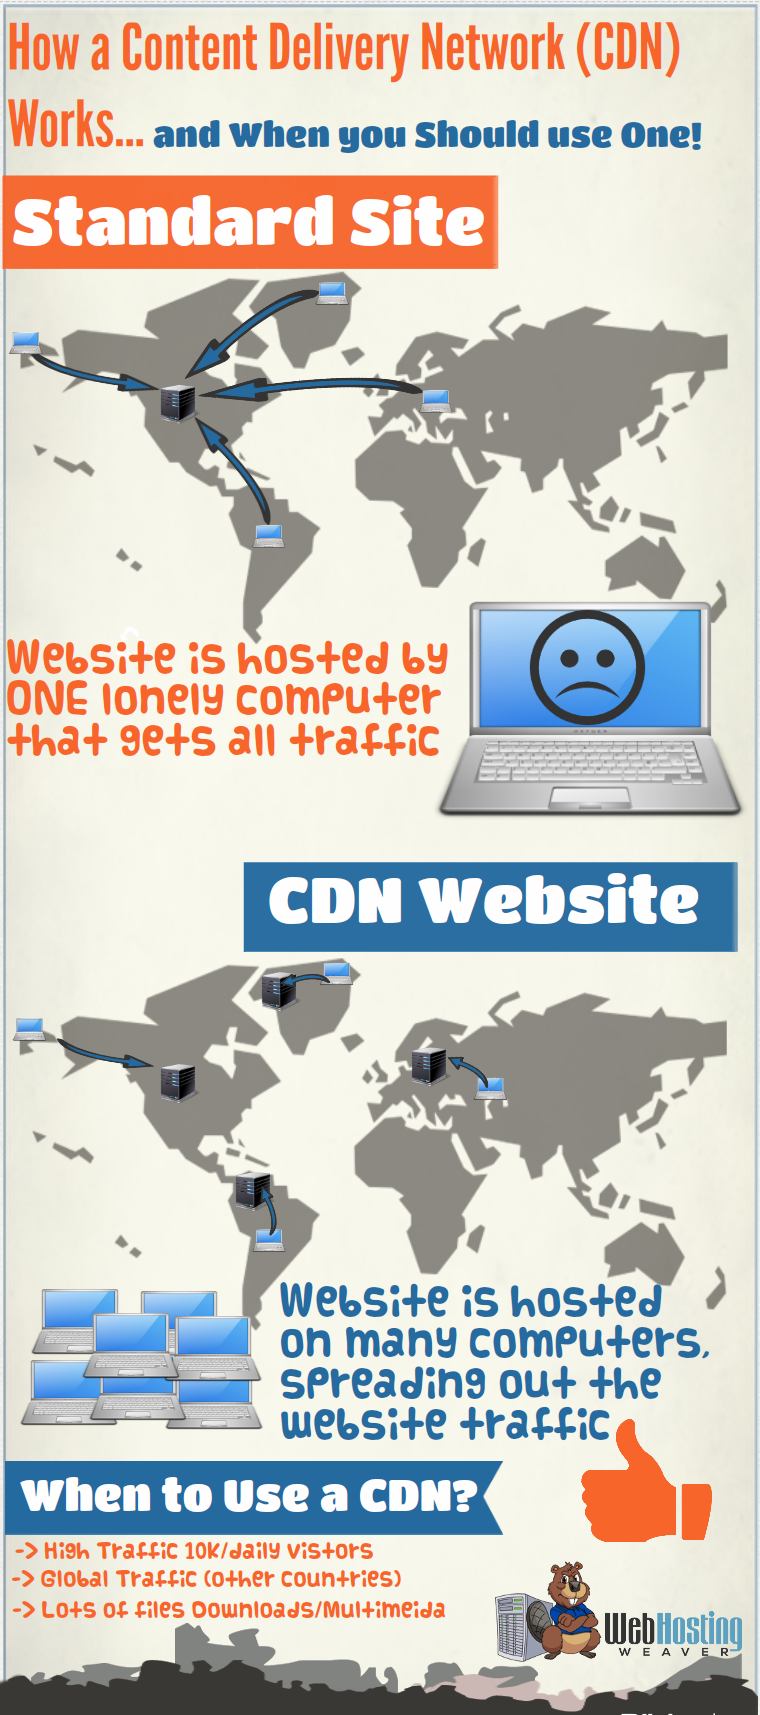 Web Hosting Weaver|Web hosting reviews - What is a CDN and how to use one.